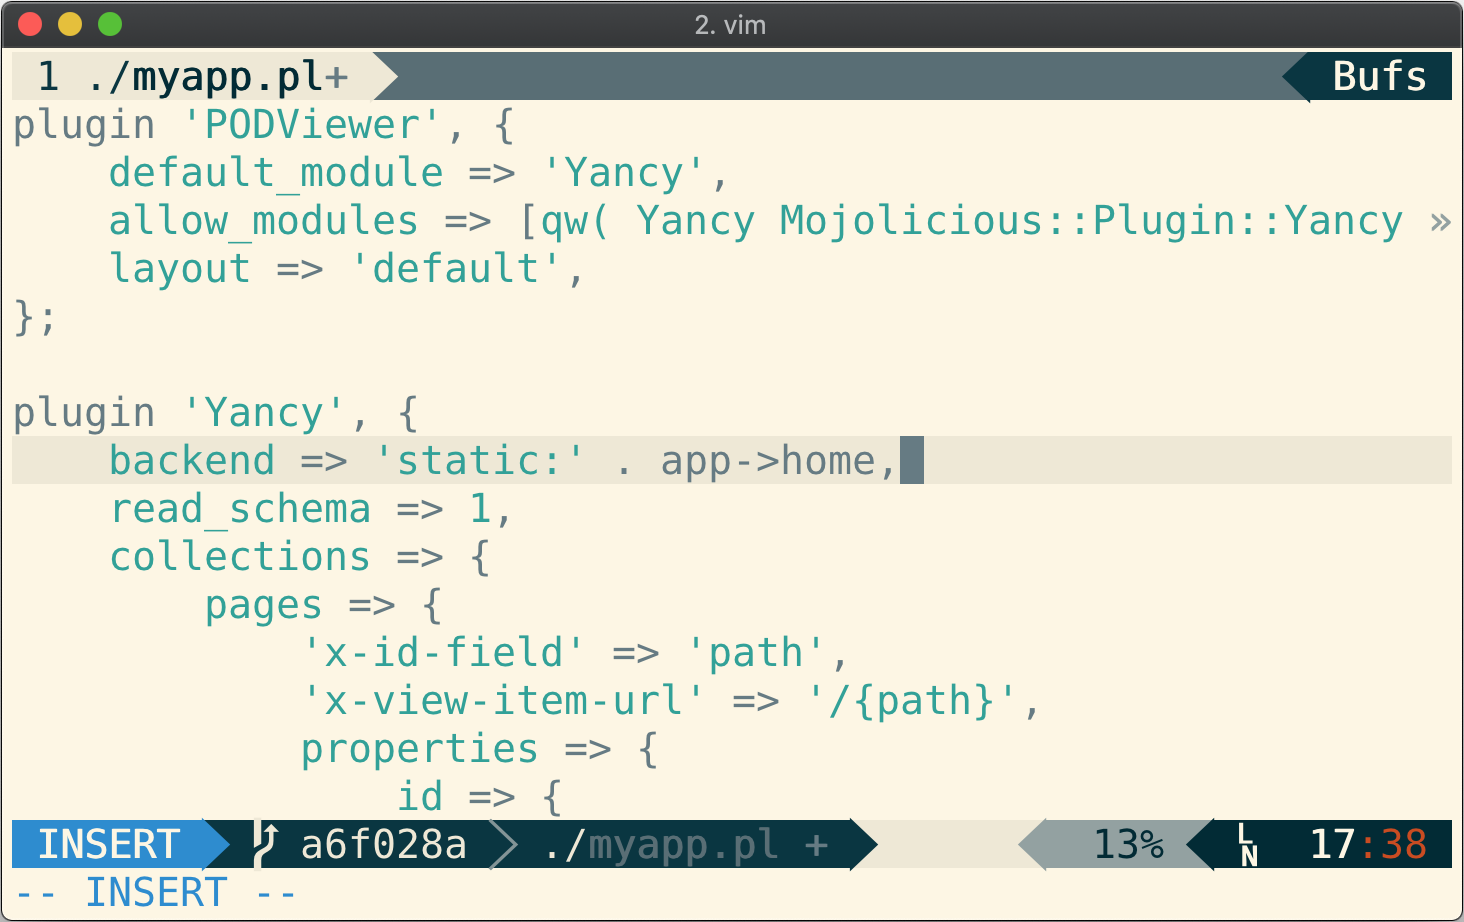 The Yancy plugin configuration with the backend changed to "static"